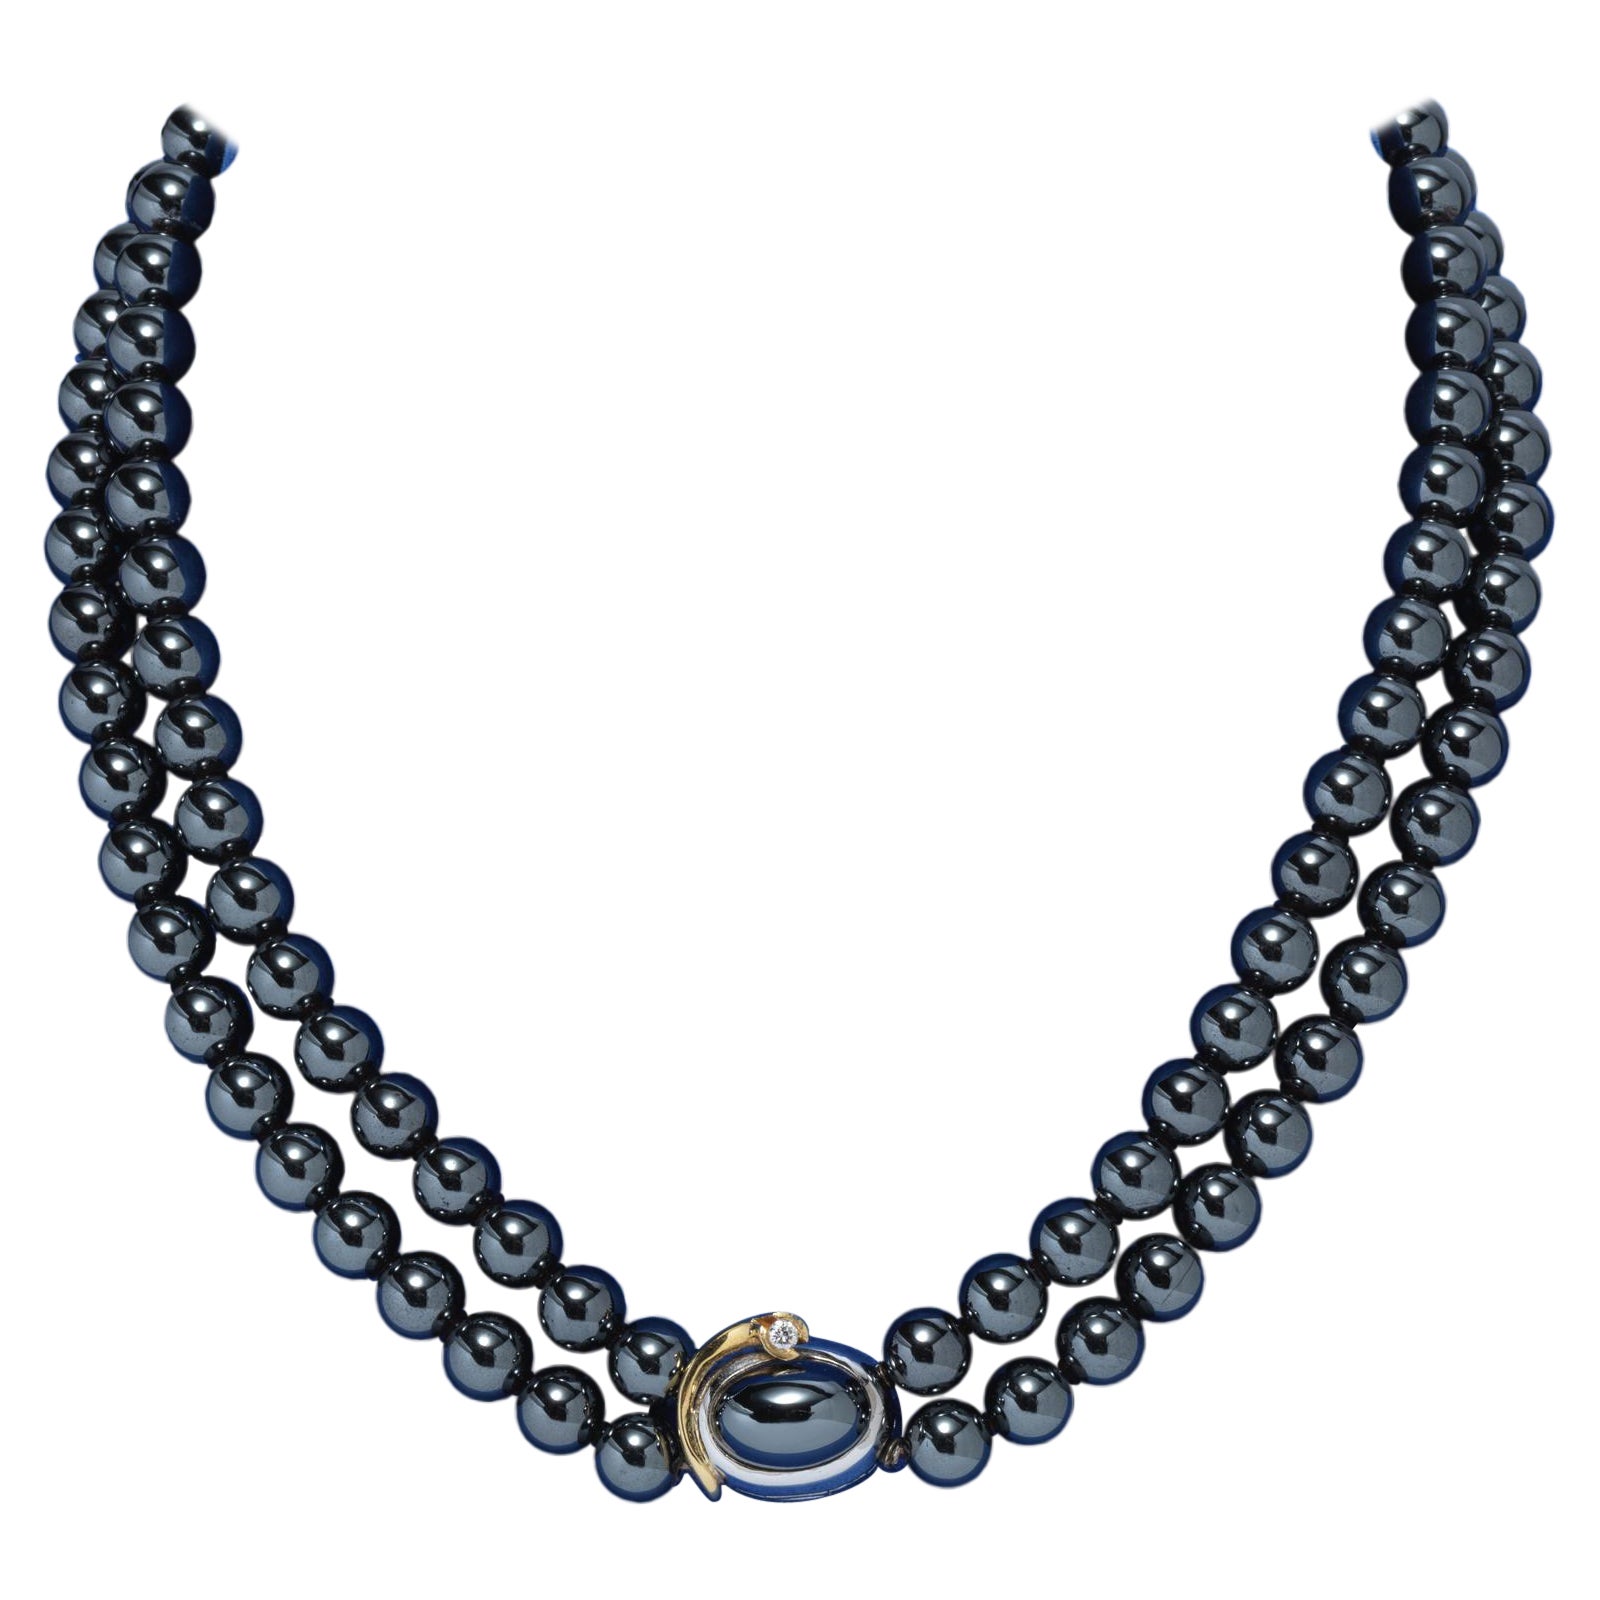 Ole Lynggaard necklace with hematite beads. Lock made of gold with a diamond. For Sale